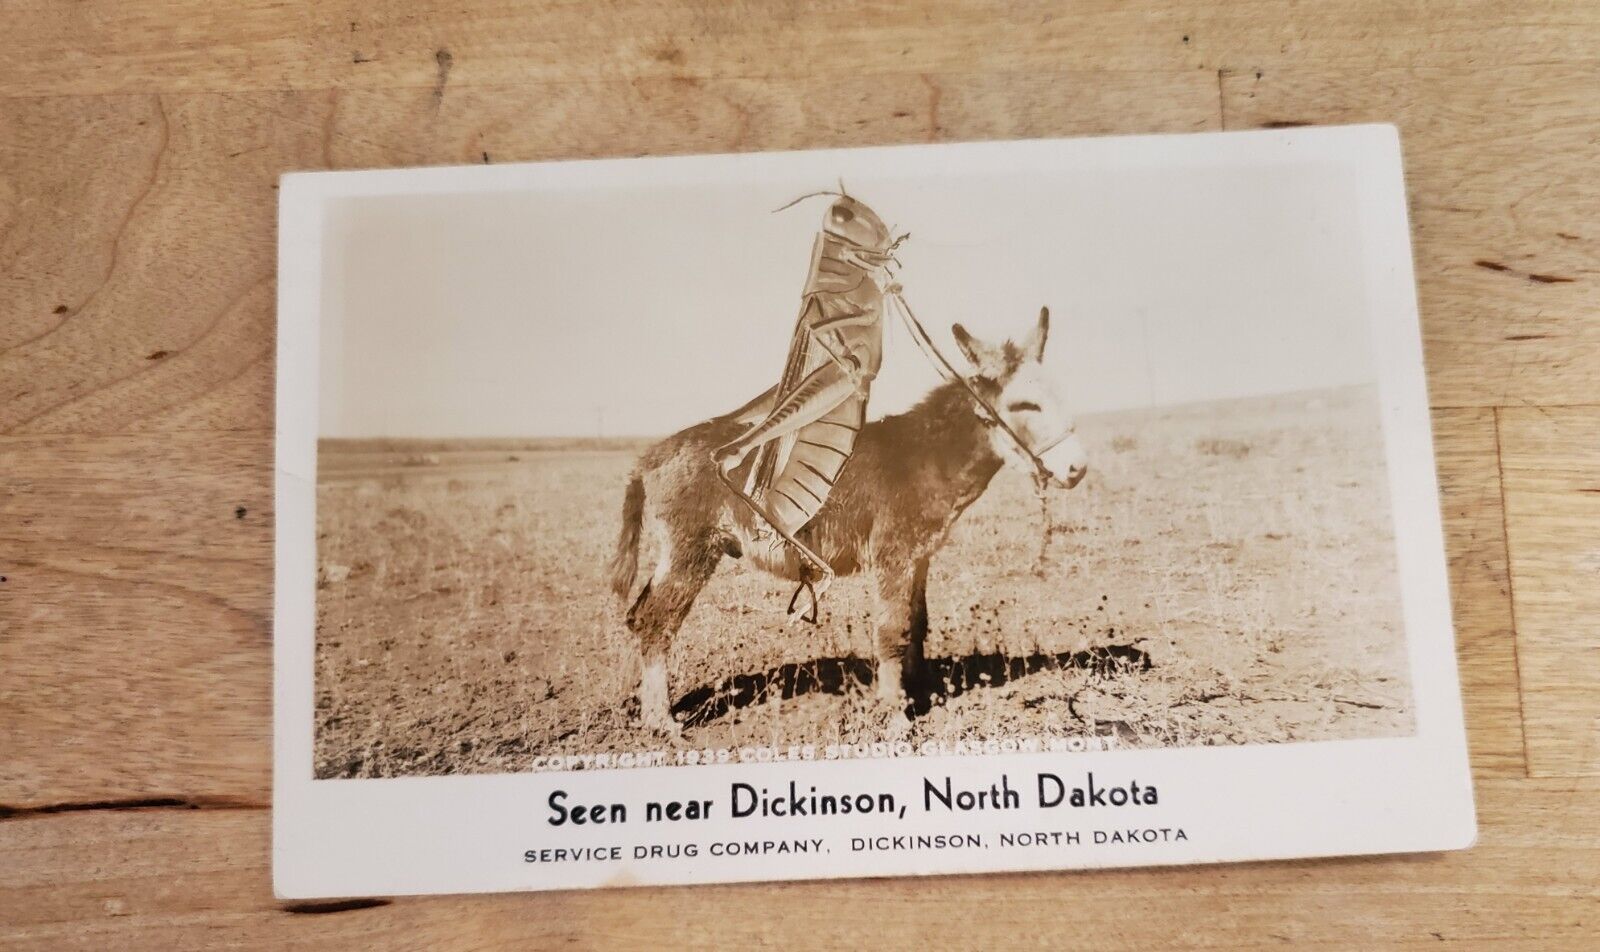 GIANT GRASSHOPPER RIDING A MULE: 1939 SERVICE DRUG CO. POSTMARKED: F+